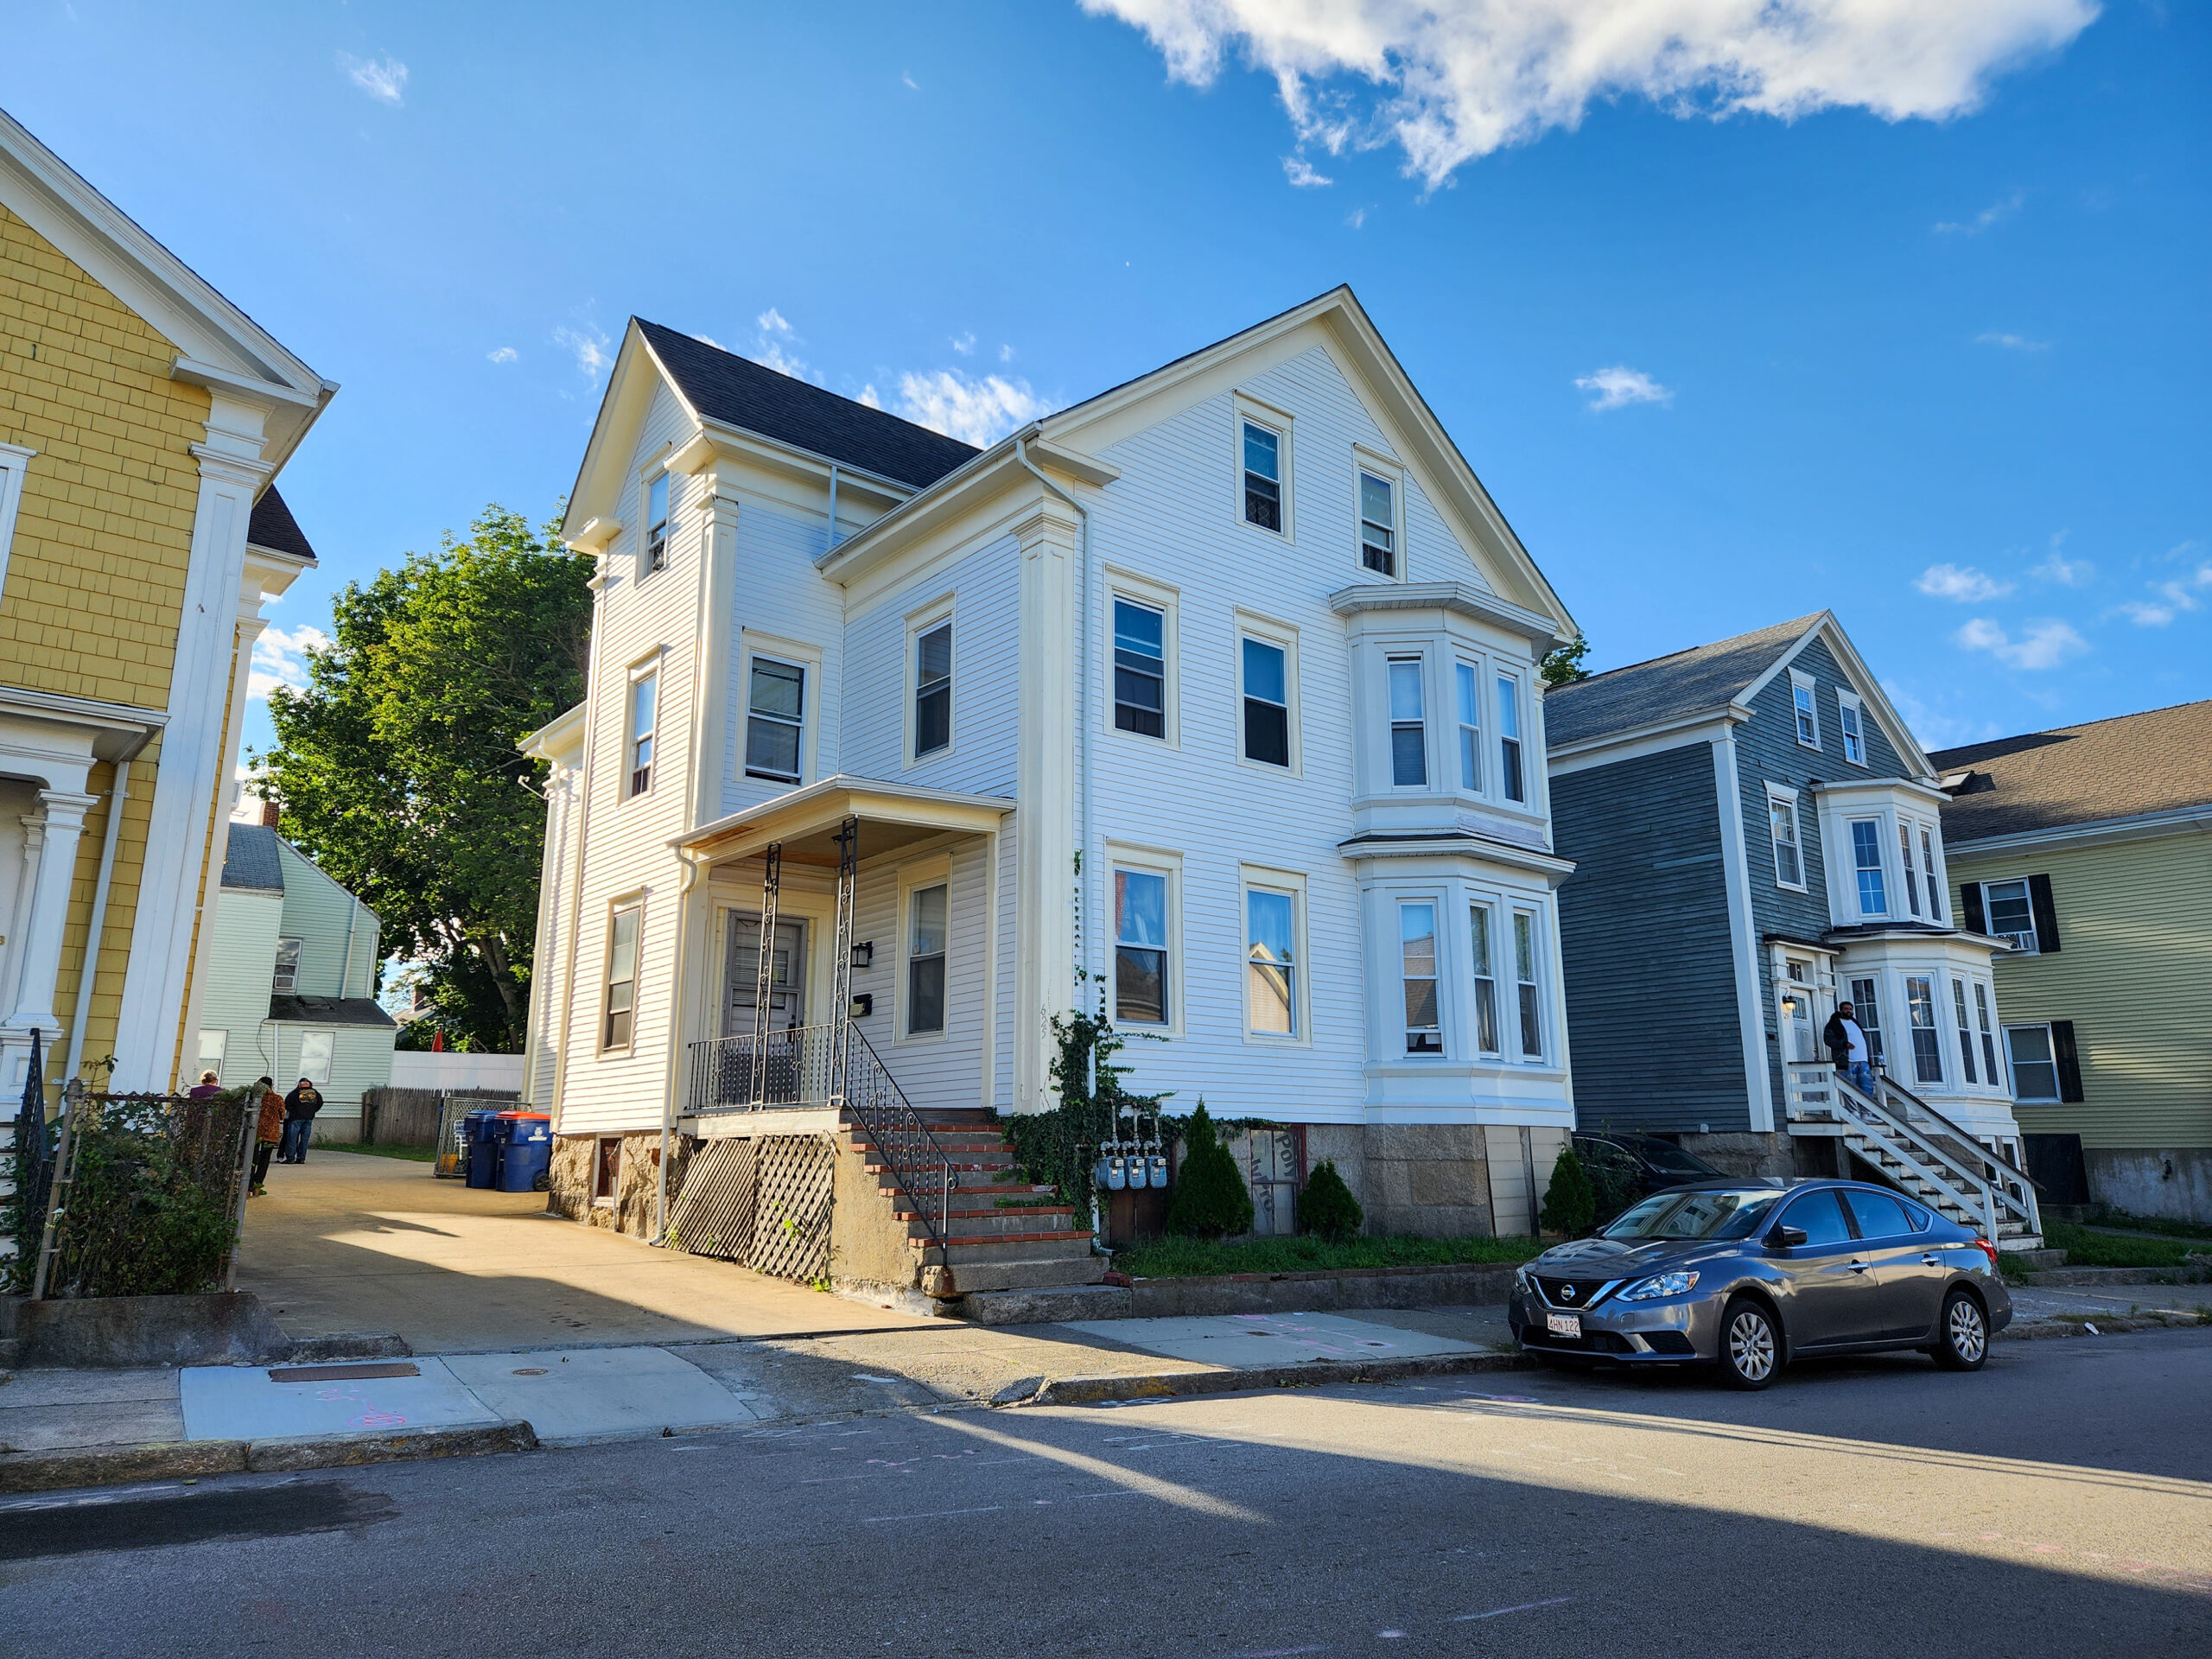 Zero Tolerance homes, Taunton, MA and Vanderburgh House Join Forces to Offer Safe, Structured Sober Living Homes